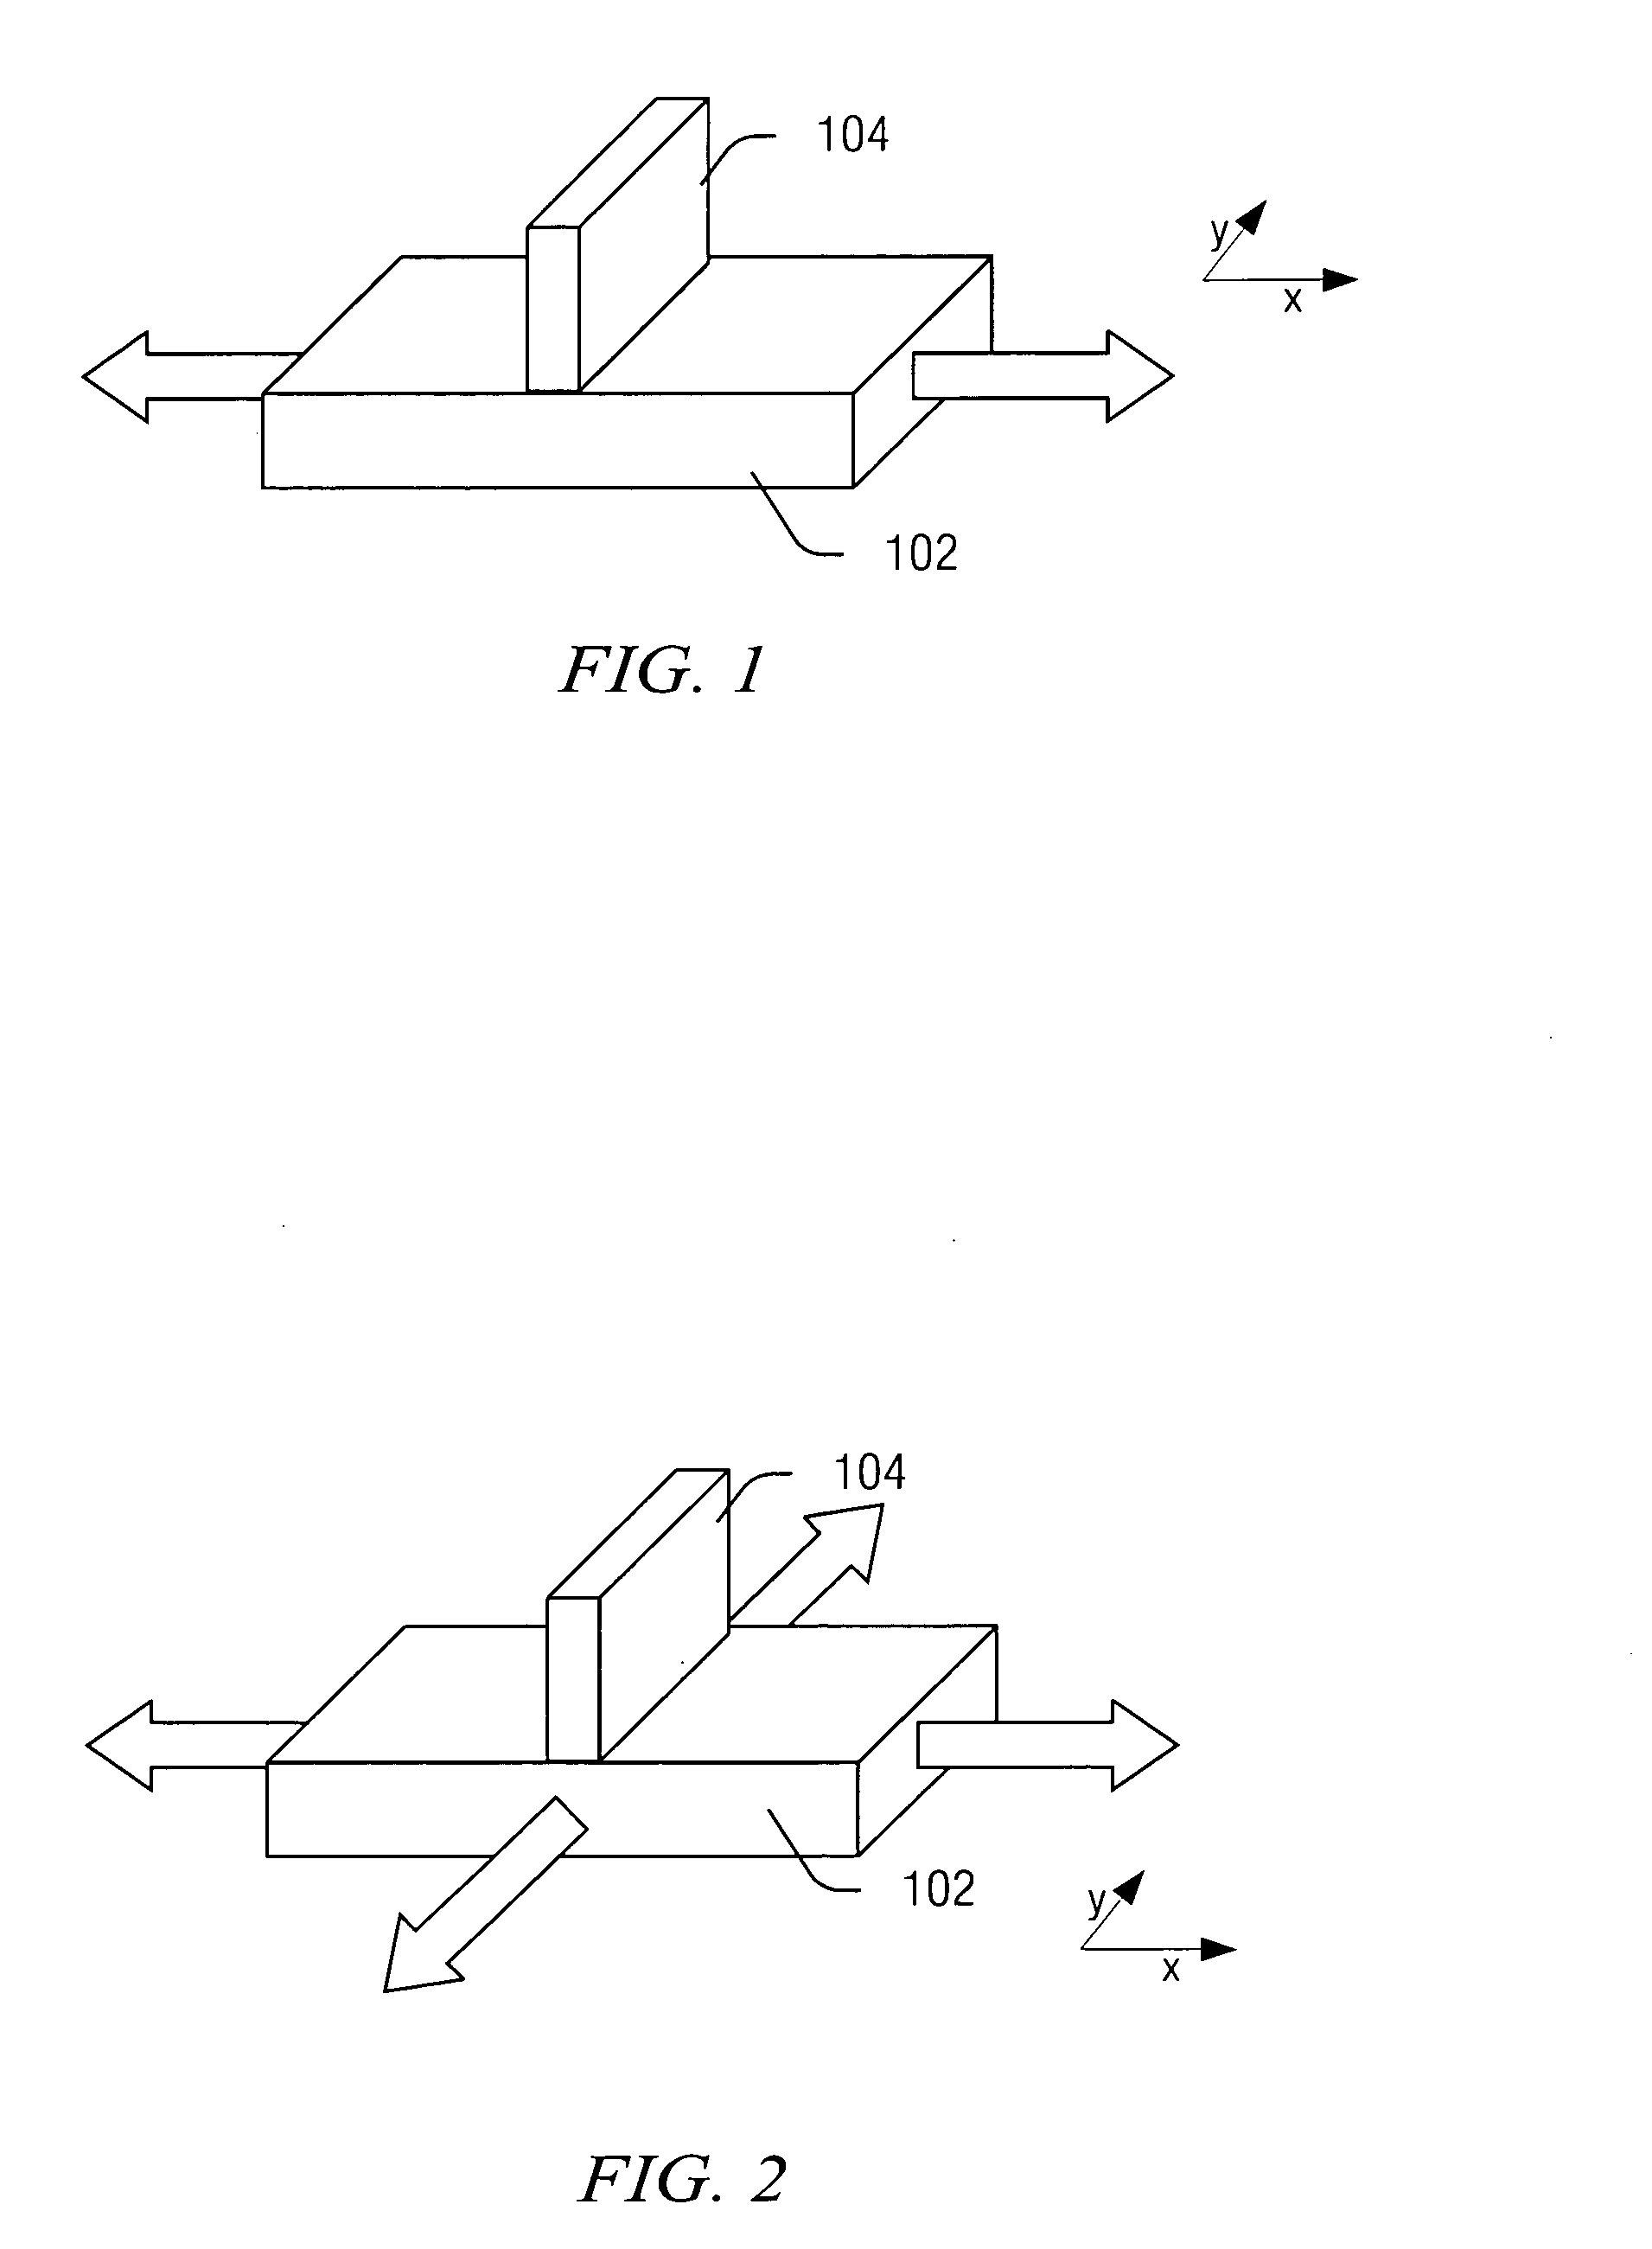 Transistor design and layout for performance improvement with strain